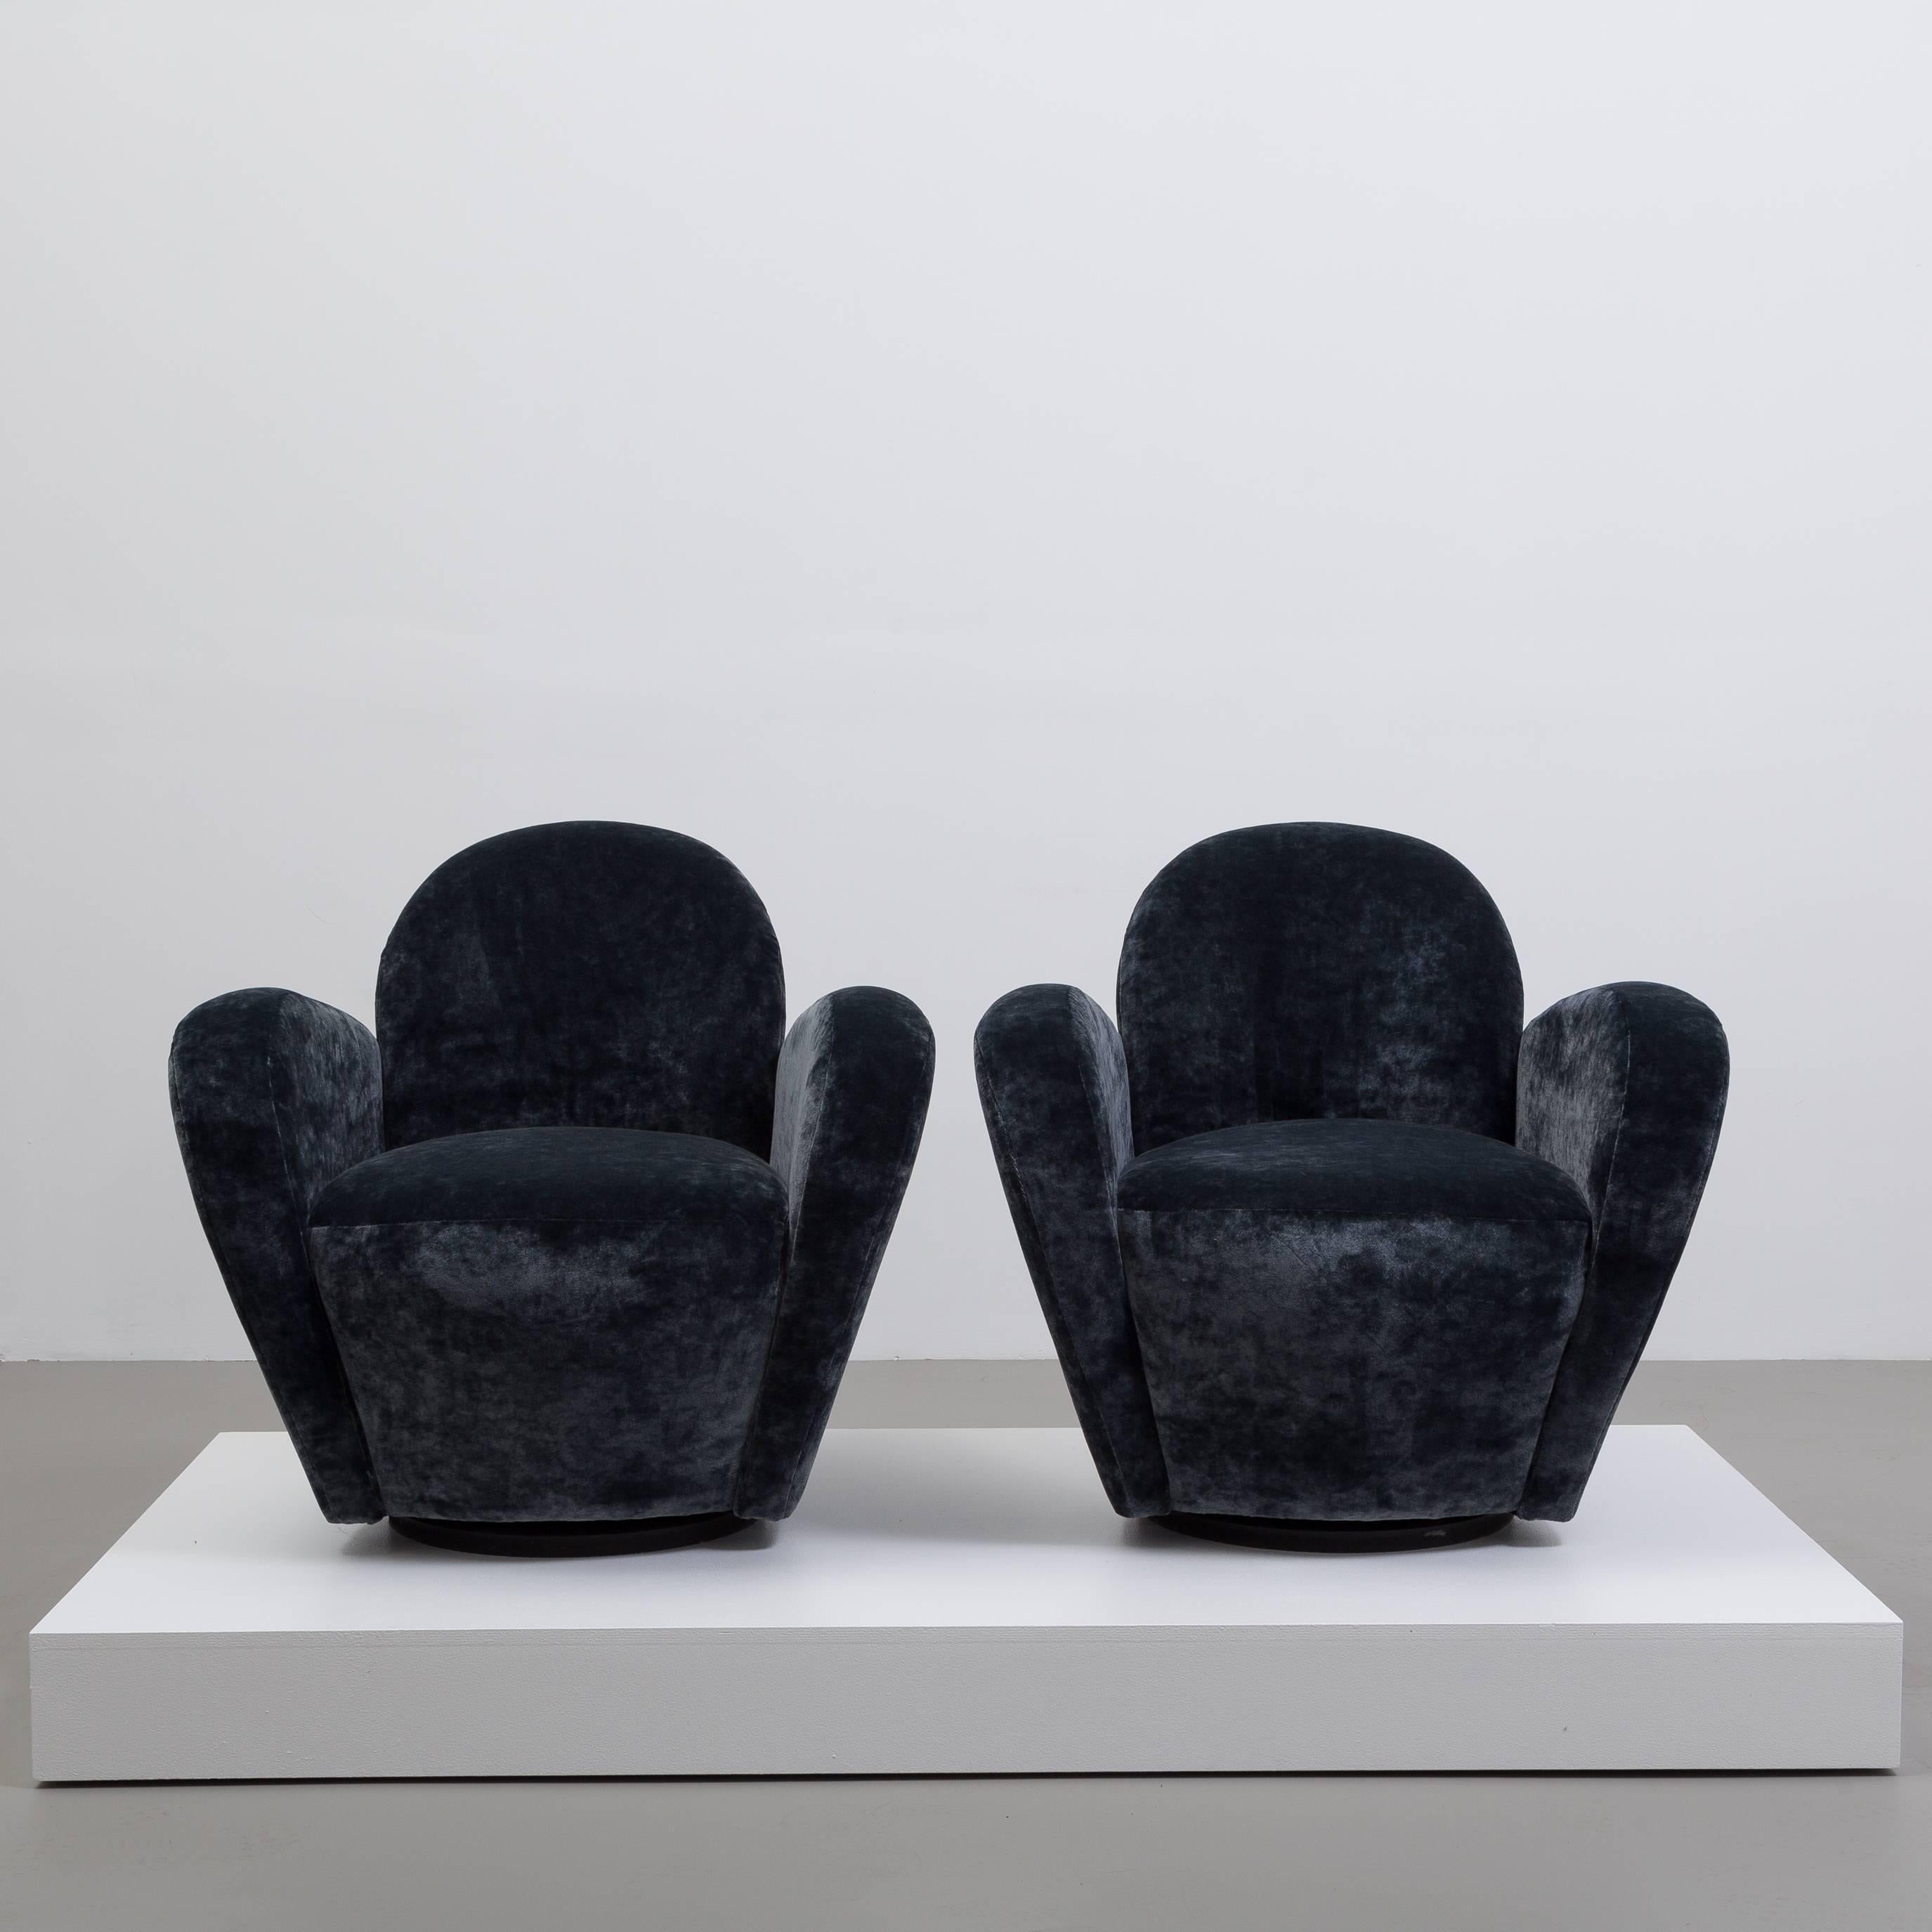 A superb pair of Vladimir Kagan for directional swivel graphite velvet upholstered armchairs, 1970s.

Fully rebuilt and reupholstered by Talisman

Price includes 20% VAT which is removed for items shipped outside the EU.